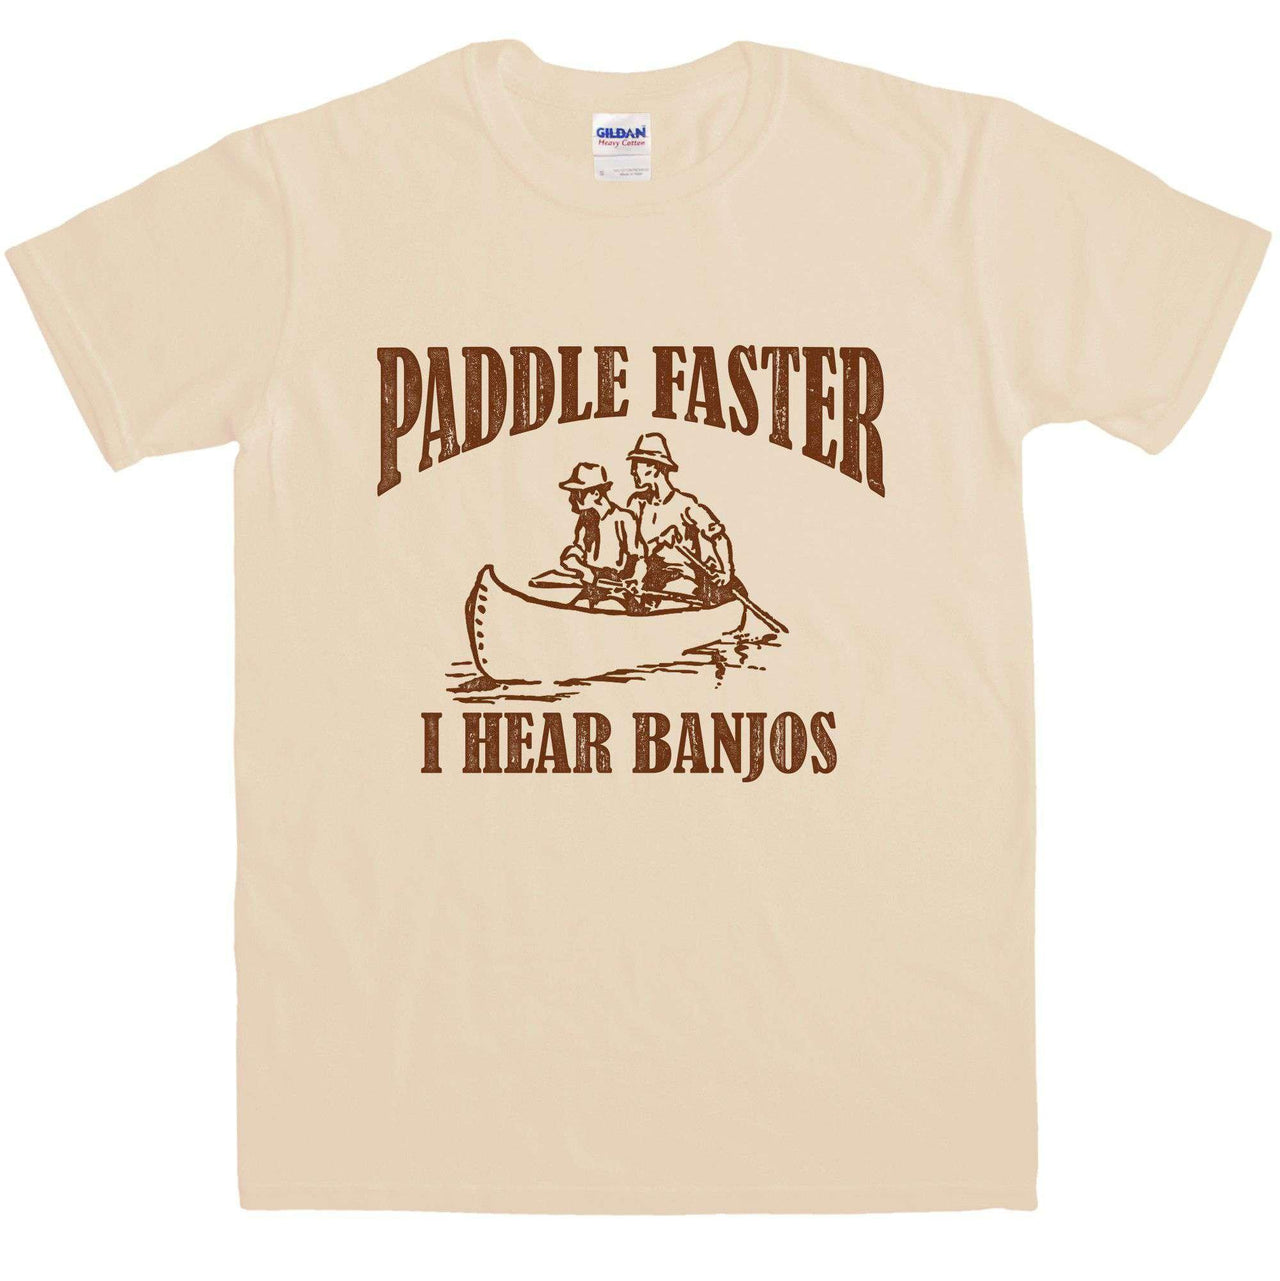 Paddle Faster Graphic T-Shirt For Men 8Ball